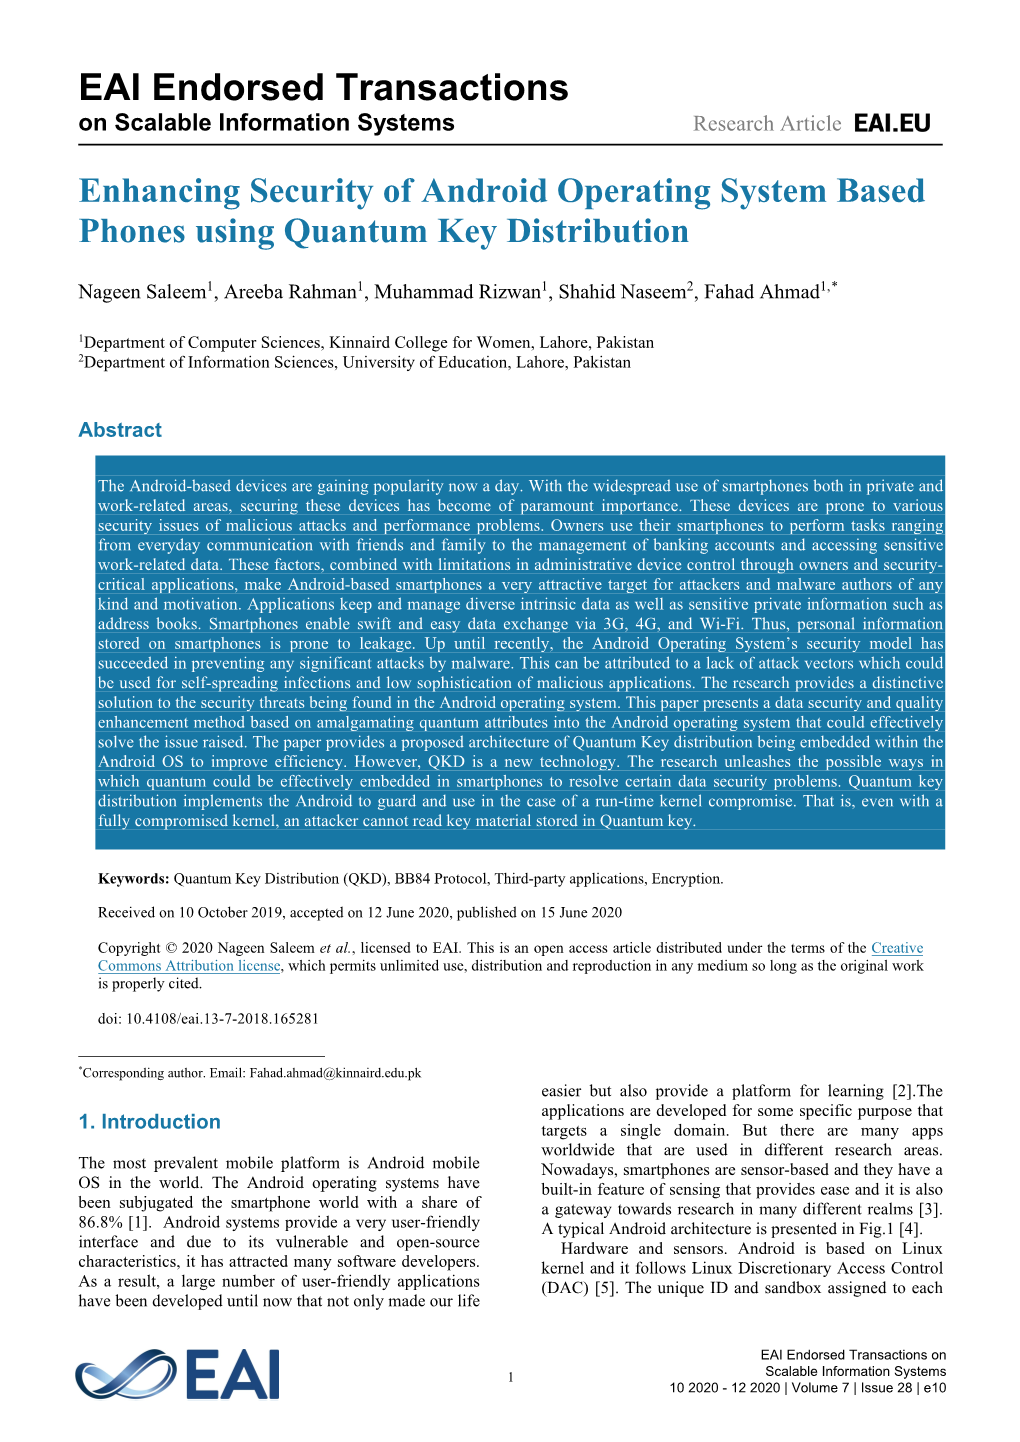 Enhancing Security of Android Operating System Based Phones Using Quantum Key Distribution